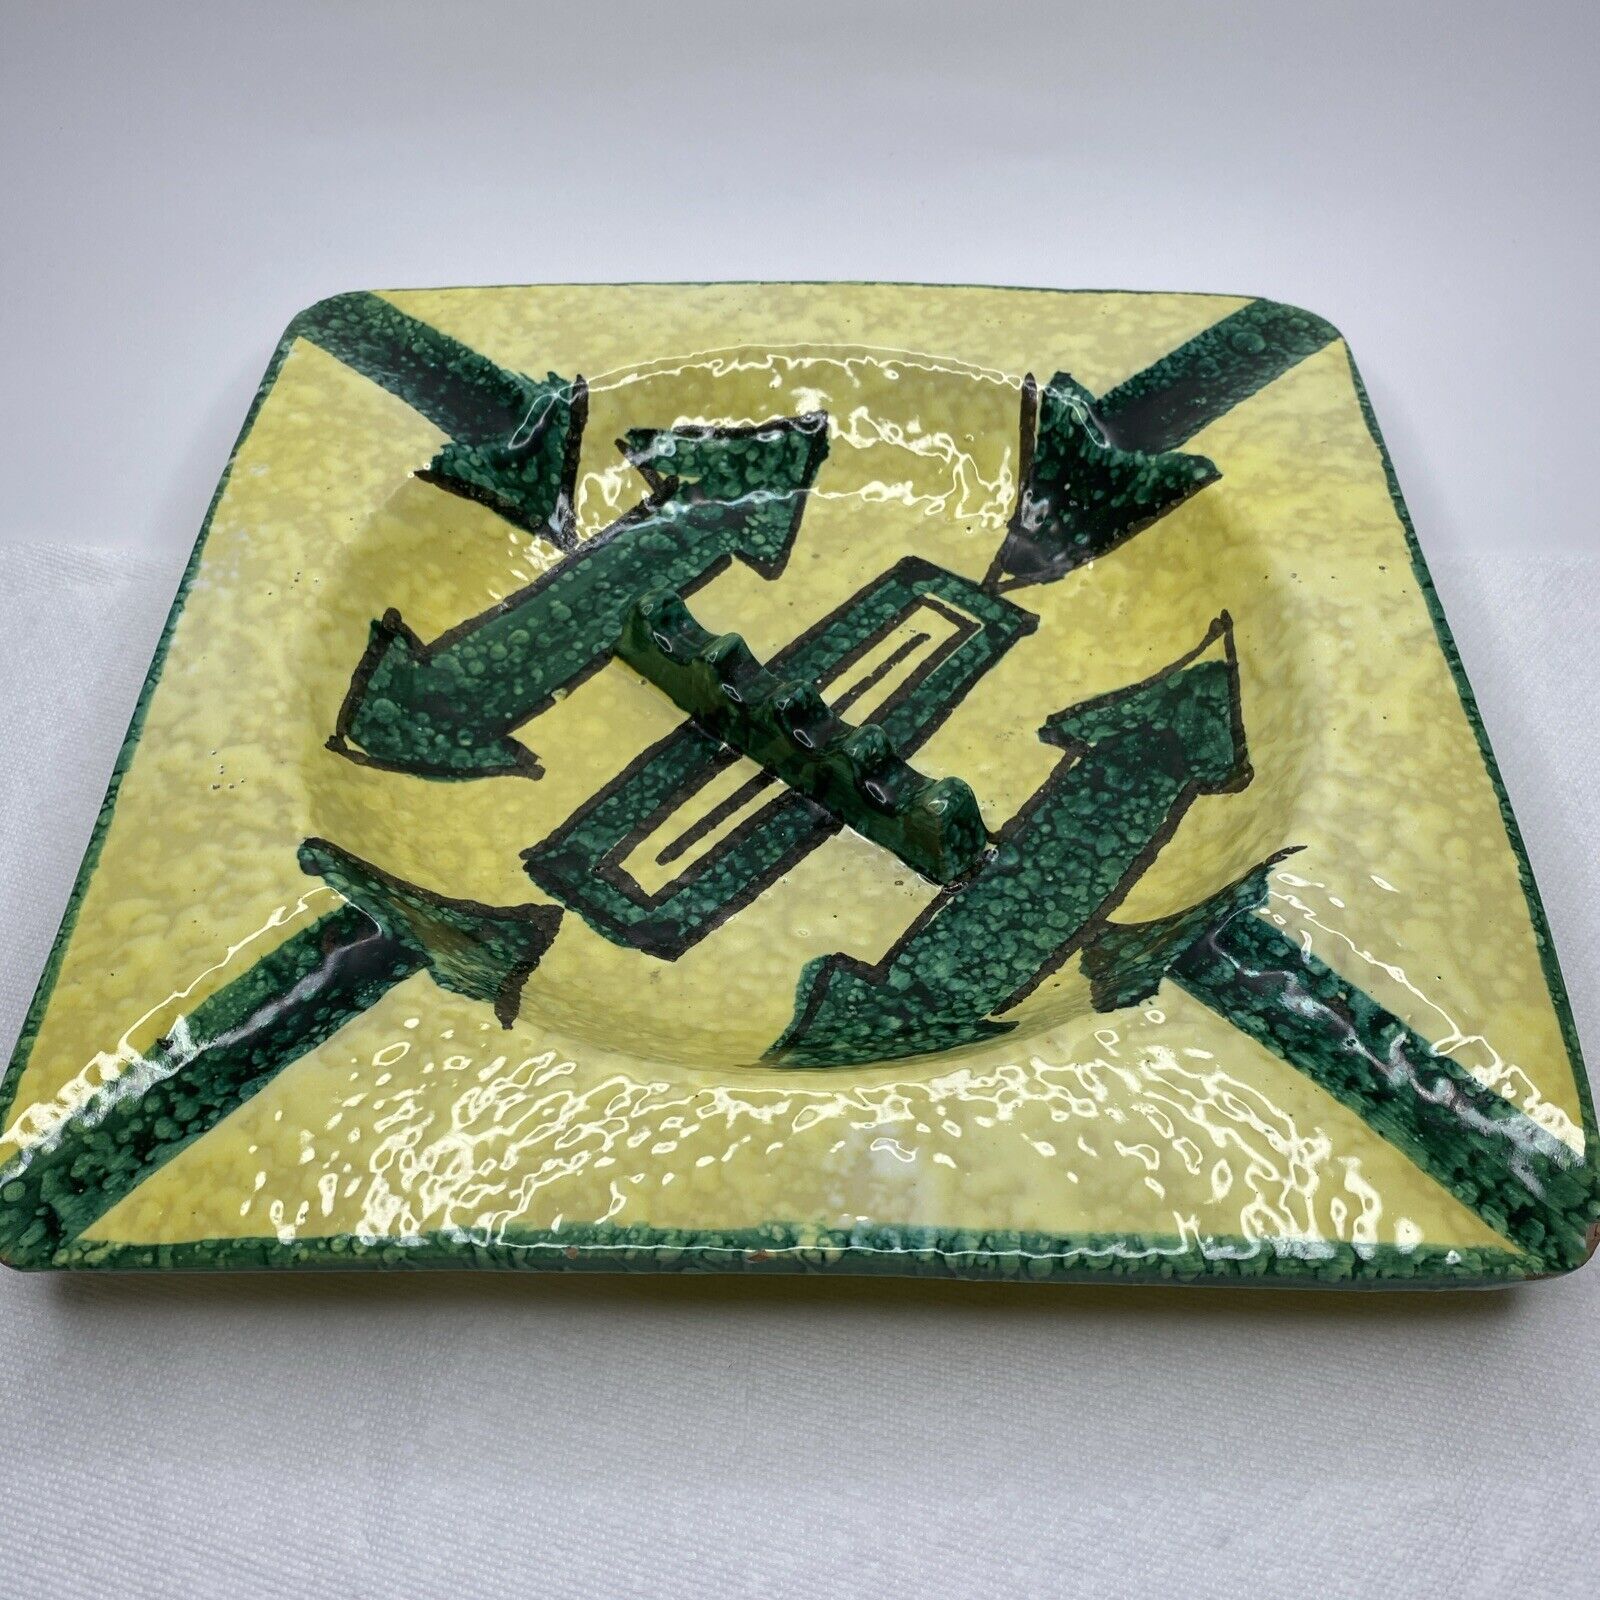 Vintage Large Heavy Green and Yellow Speckled Ceramic Ashtray Made in Italy